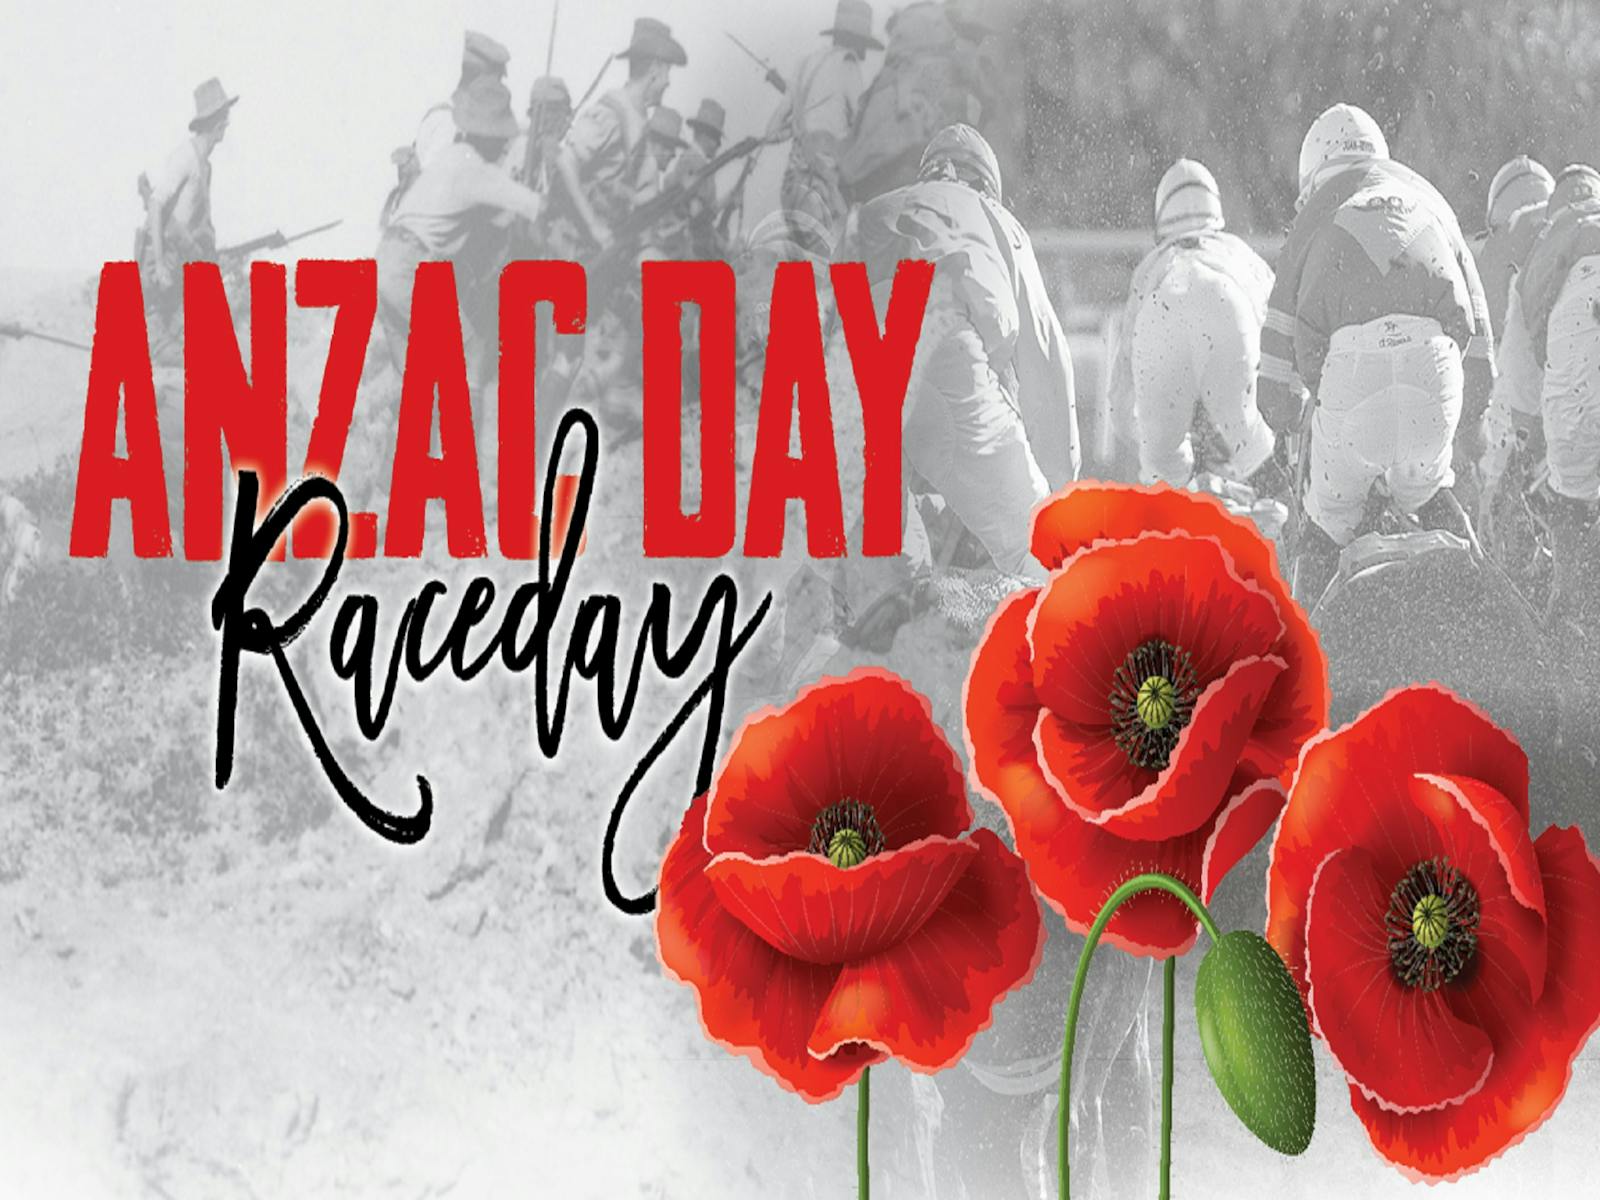 Image for ANZAC Day Raceday